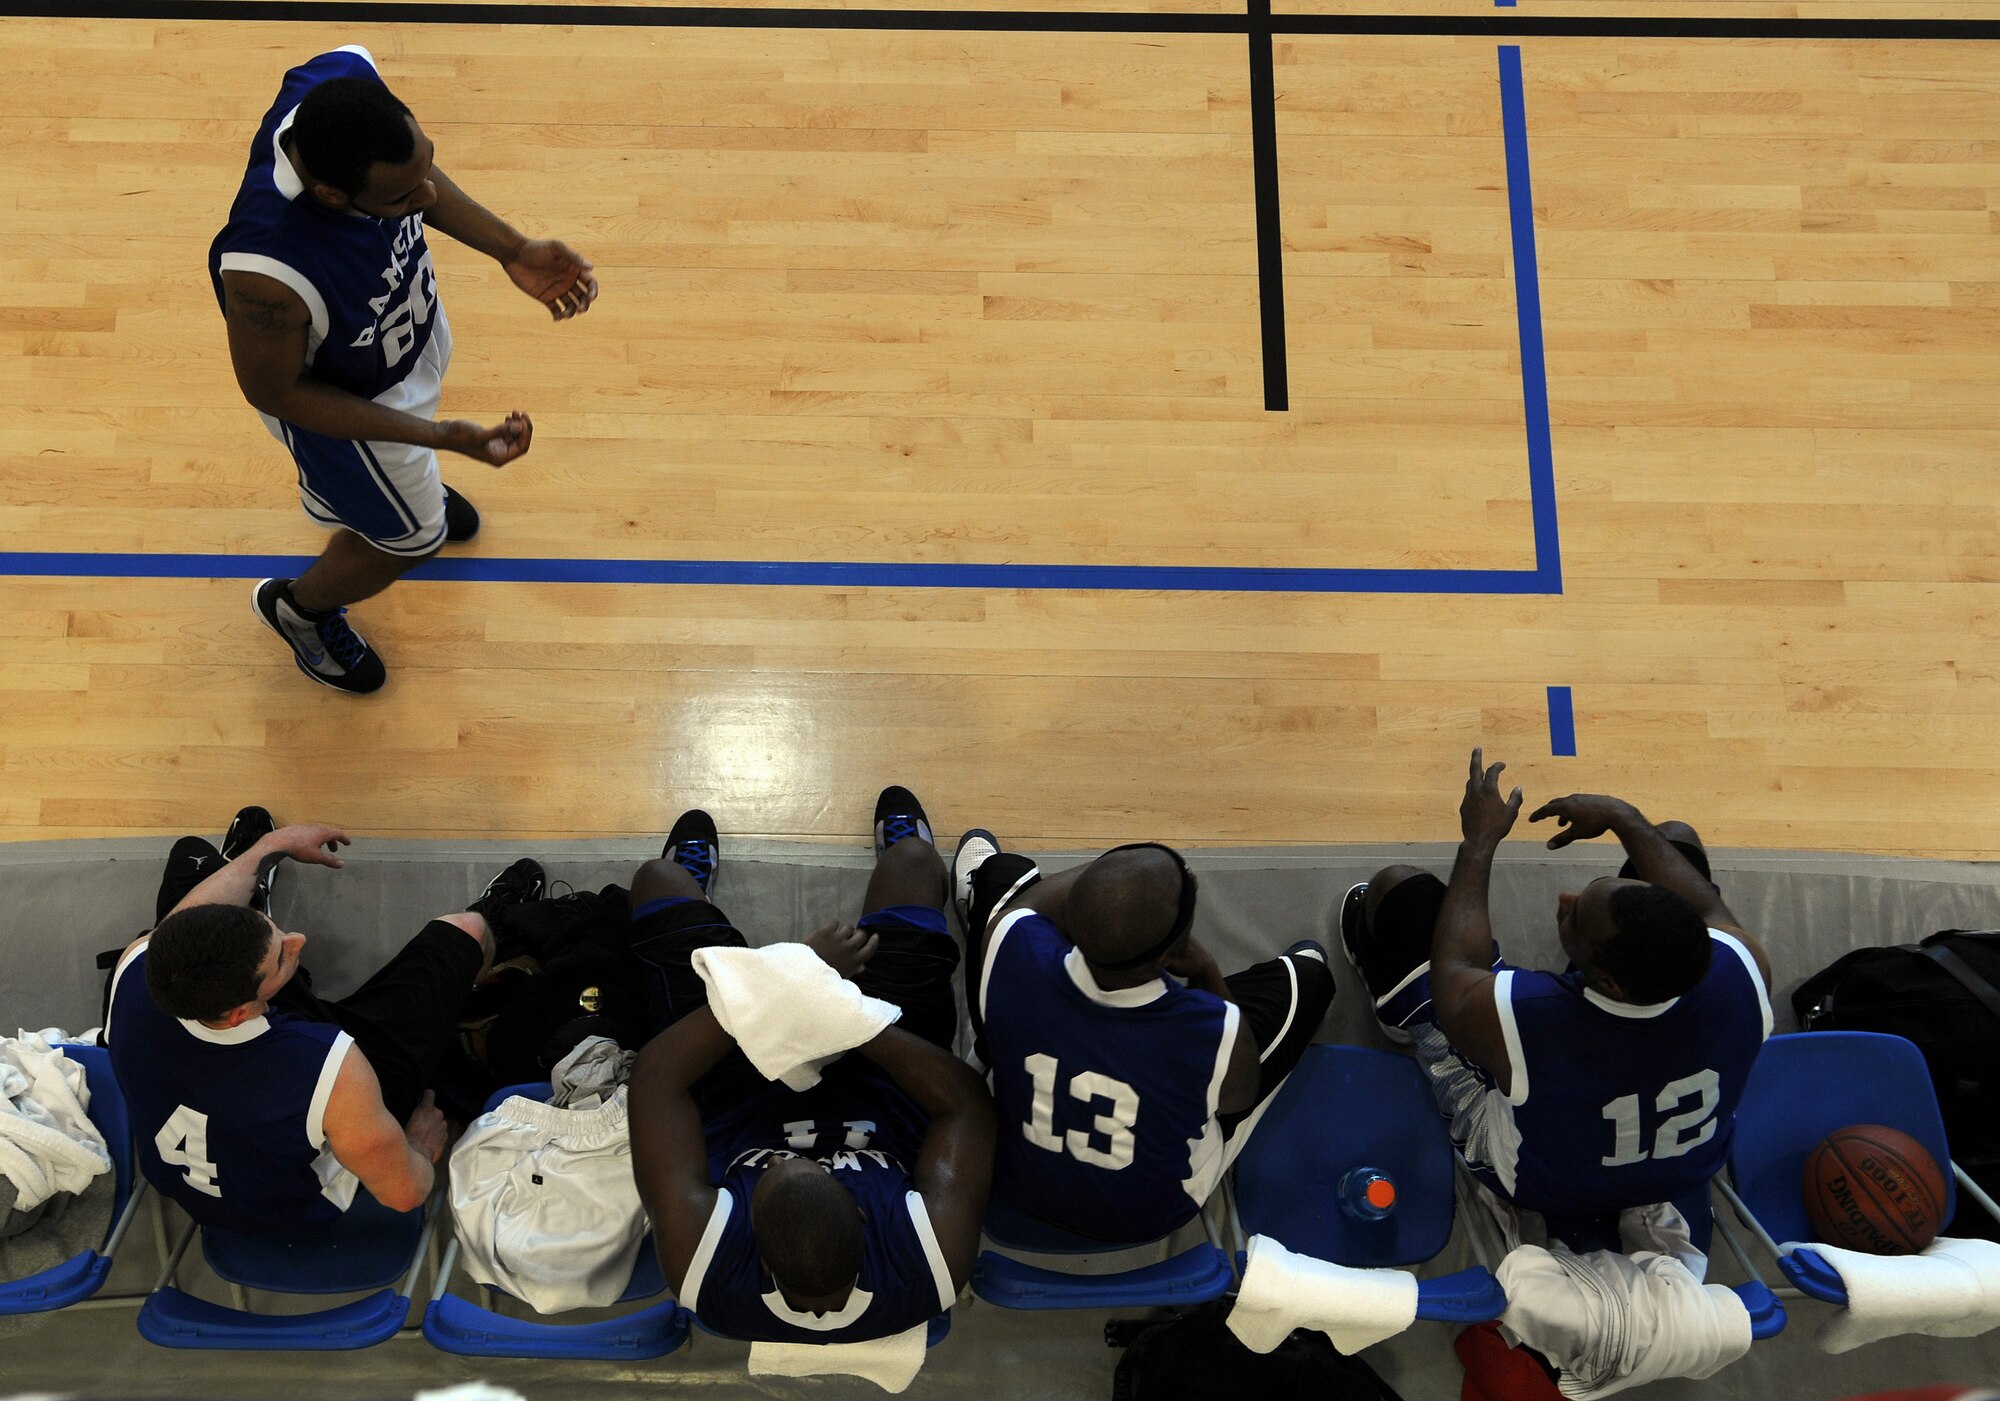 RAF MILDENHALL, England -- Players from the 86th Services Squadron try to develop a plan during halftime at the championship game of the 2010 U.S. Air Forces in Europe Small Unit/Intramural Basketball Championships at the Hardstand Fitness Center here March 7. The 86th SVS lost the title to the 86th Communication Squadron in a 91-86 game. (U.S. Air Force photo/Staff Sgt. Thomas Trower)